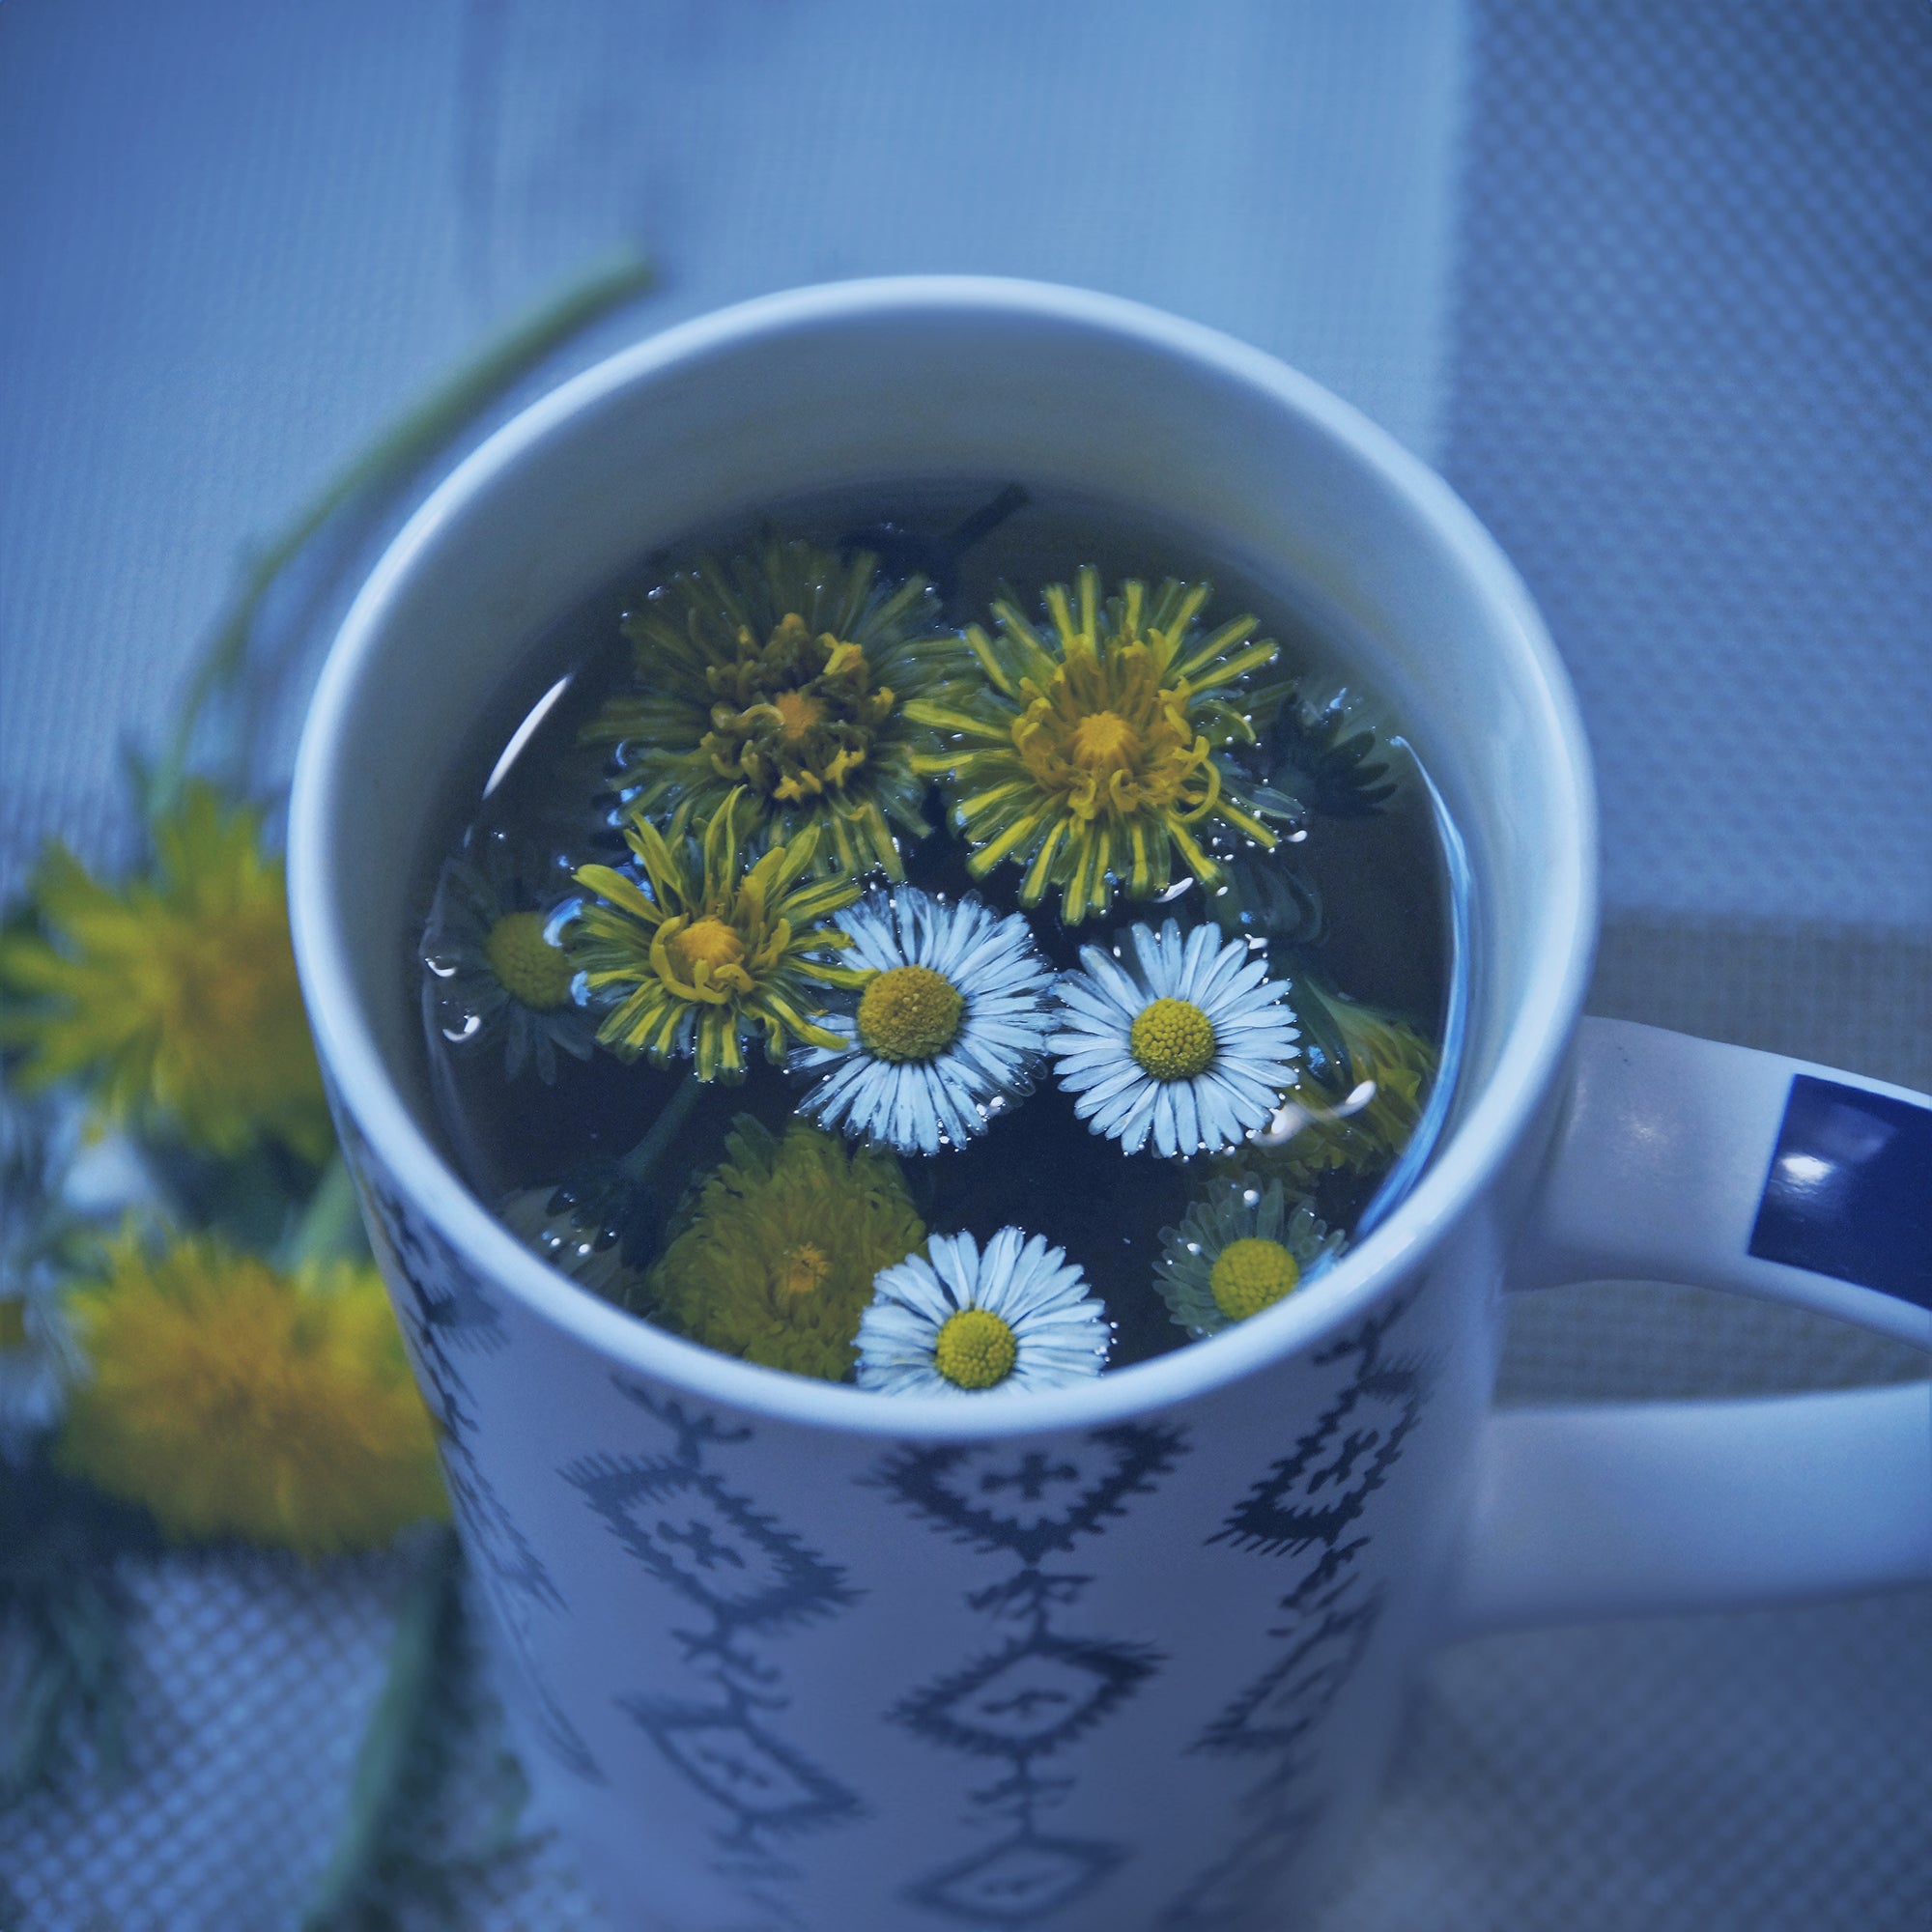 Dandelion flowers in a tea cup with a couple of dandelions on the table